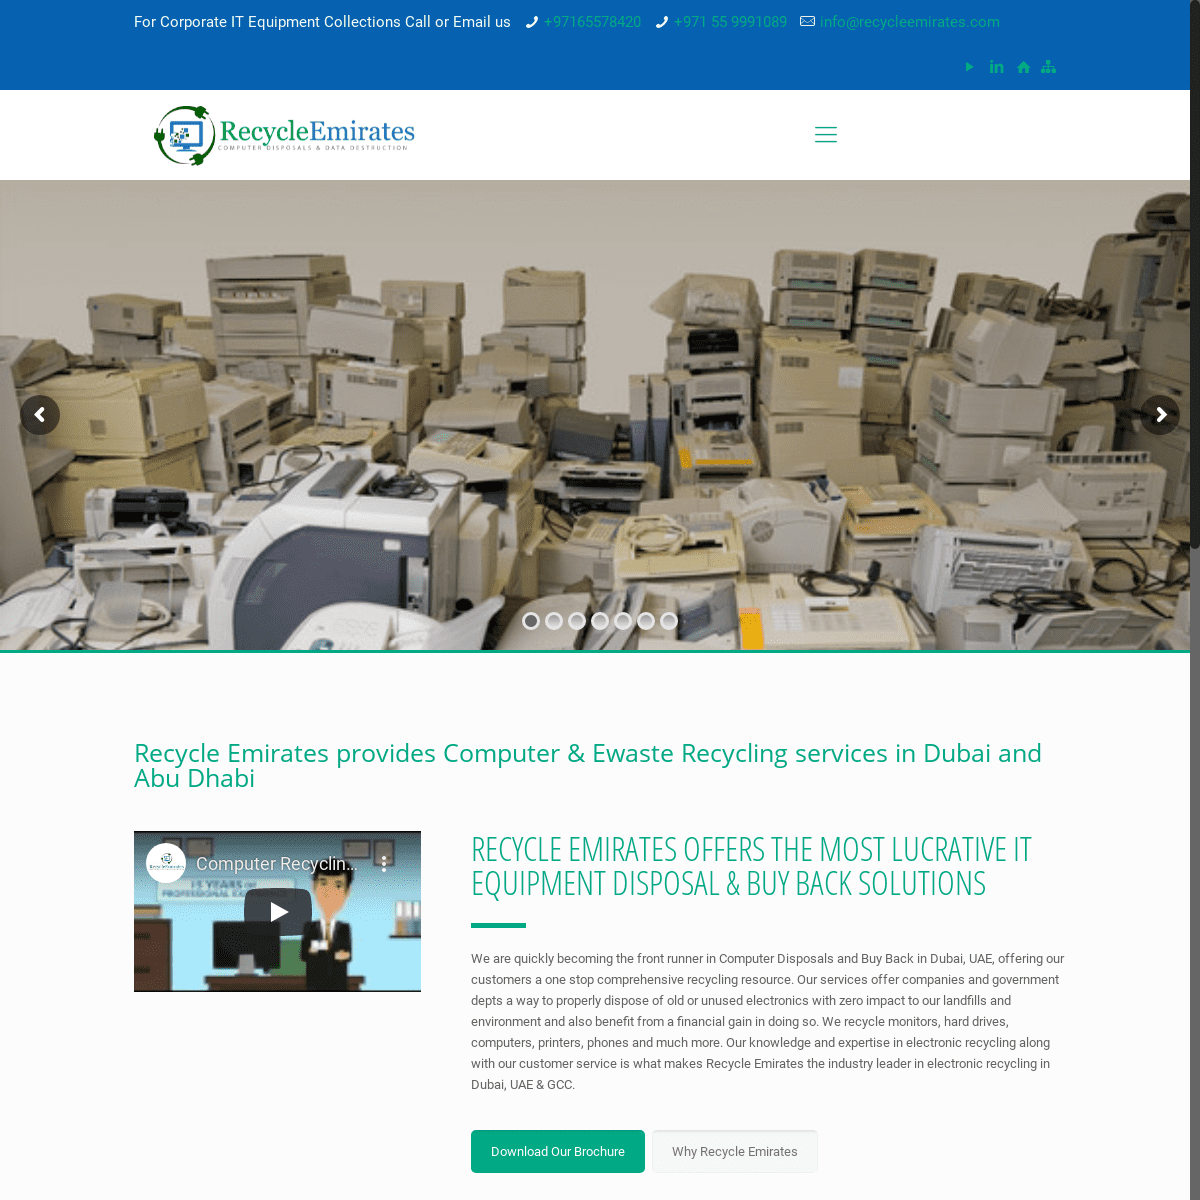 A complete backup of https://recycleemirates.com